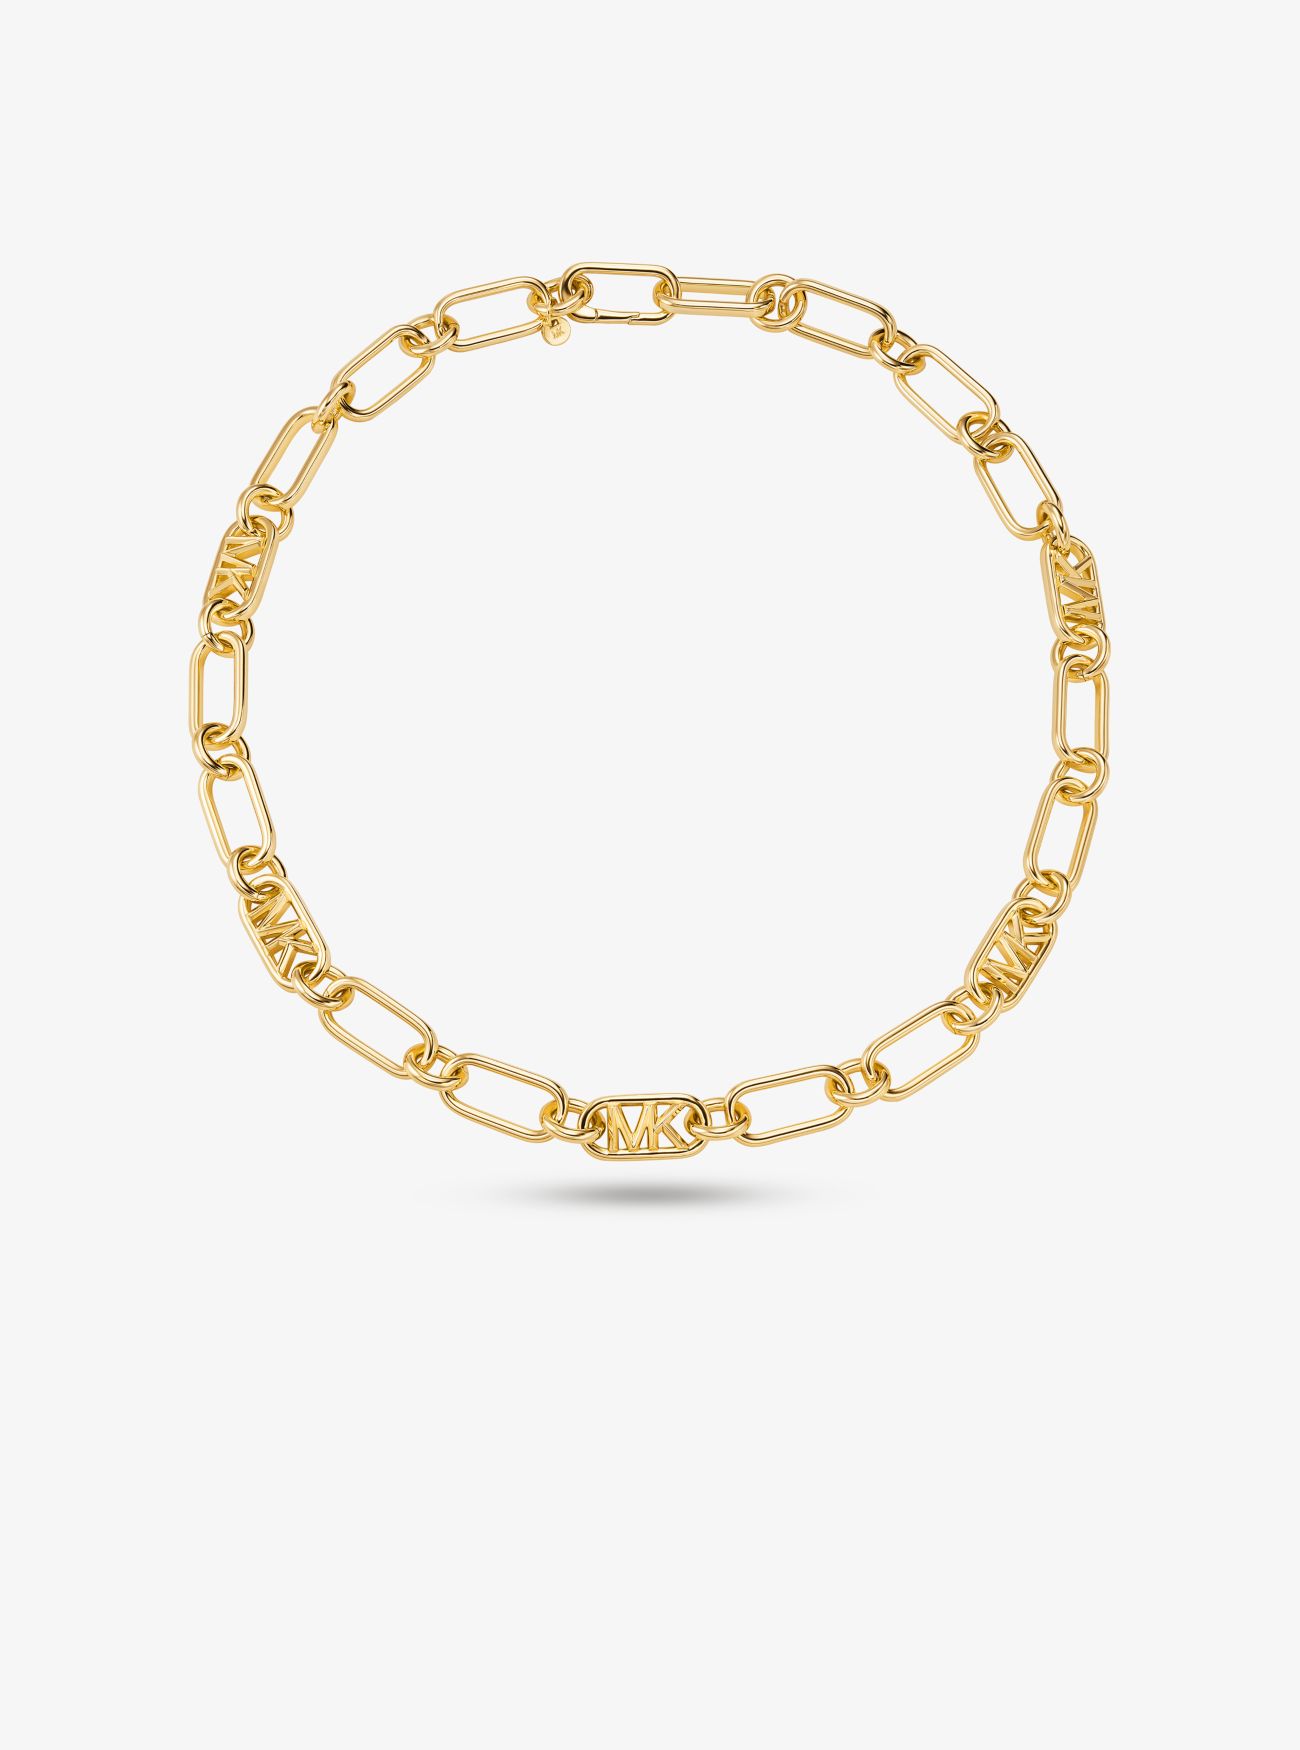 MK Precious Metal-Plated Brass Chain Link Necklace - Gold - Michael Kors